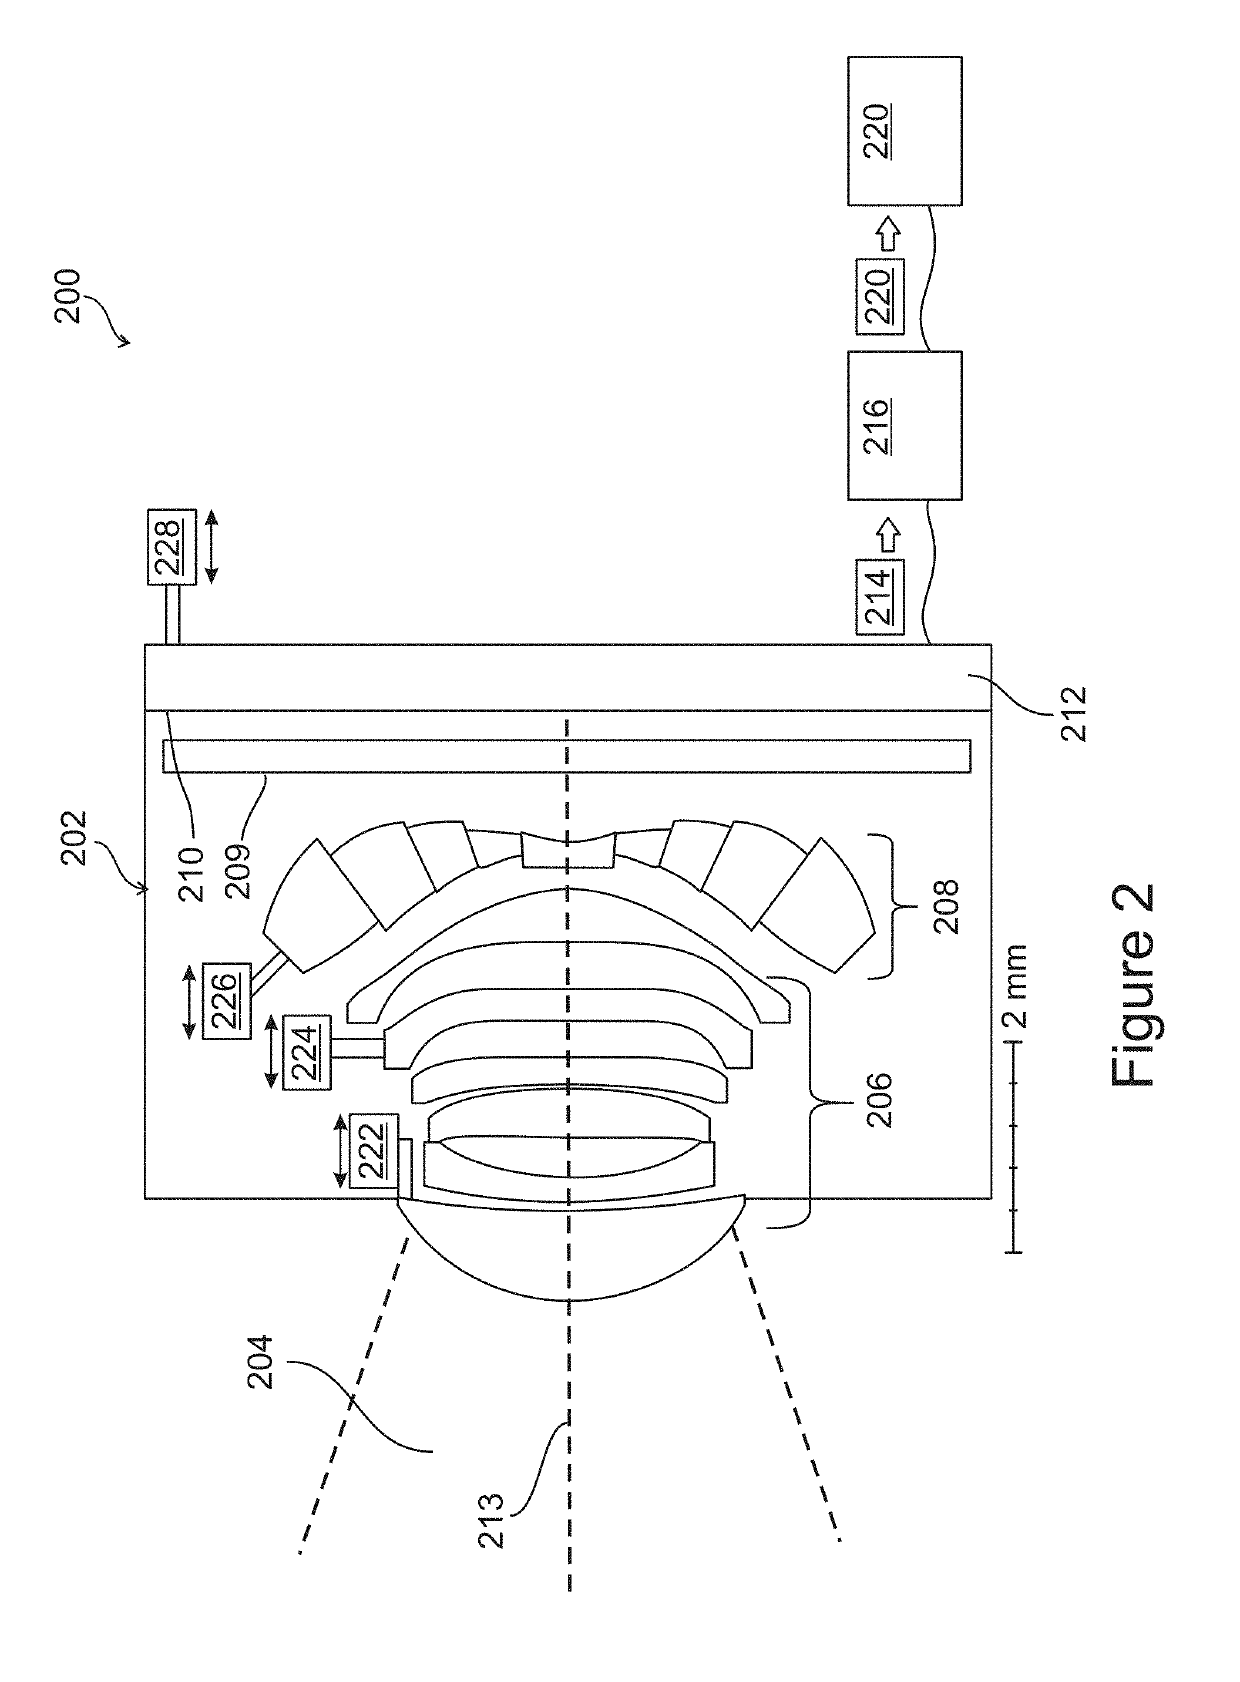 Lens design with tolerance of fabrication errors